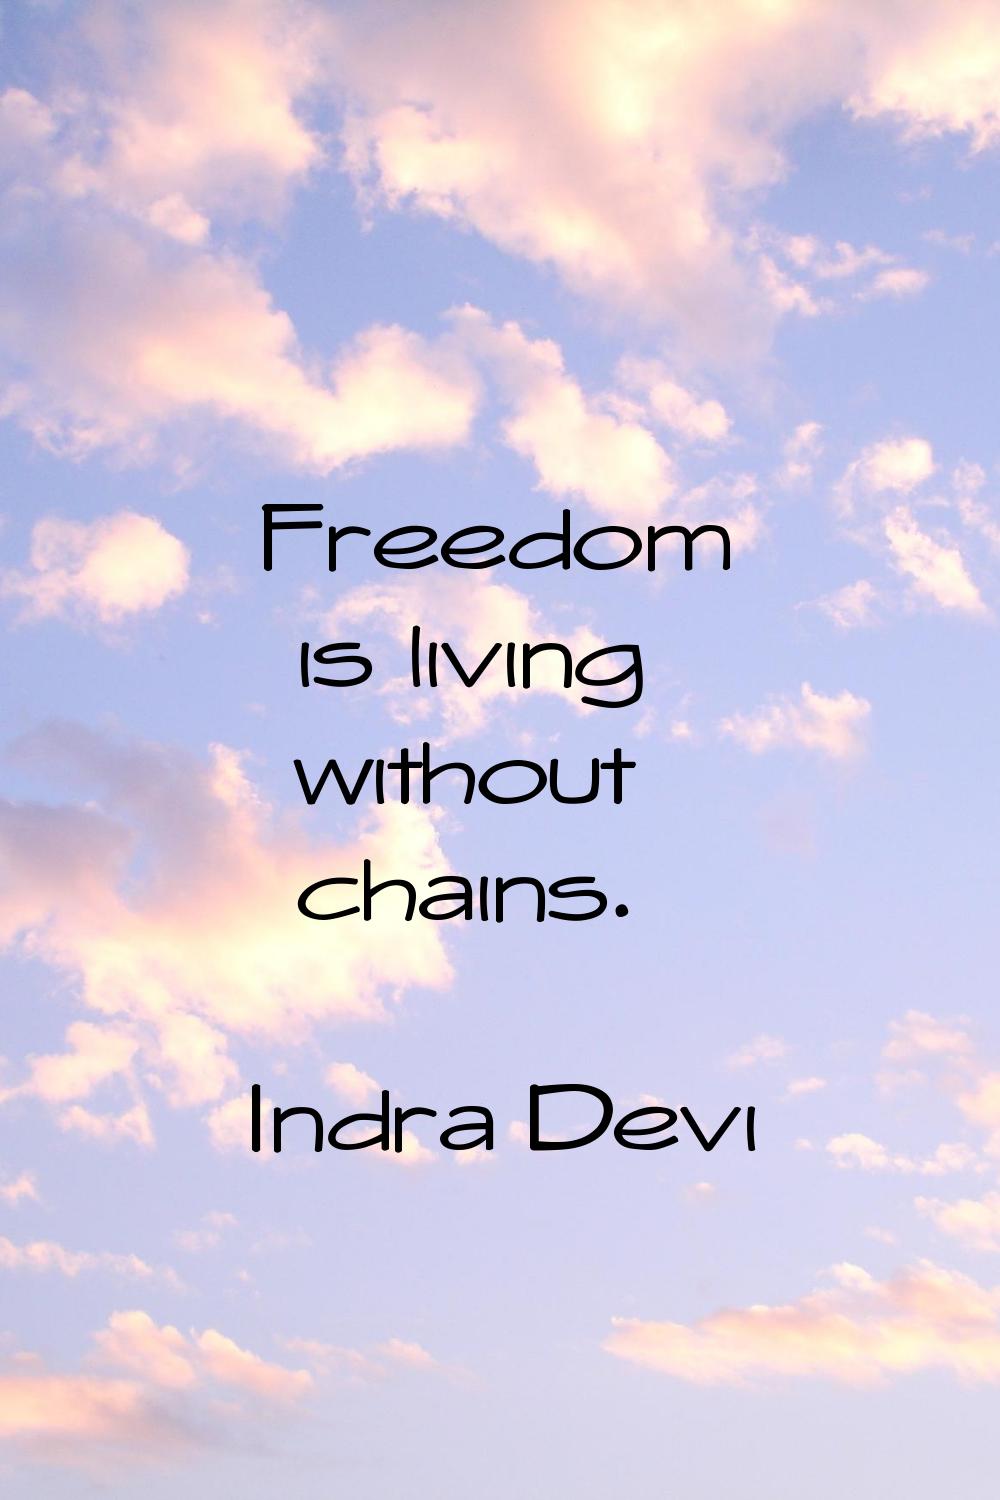 Freedom is living without chains.